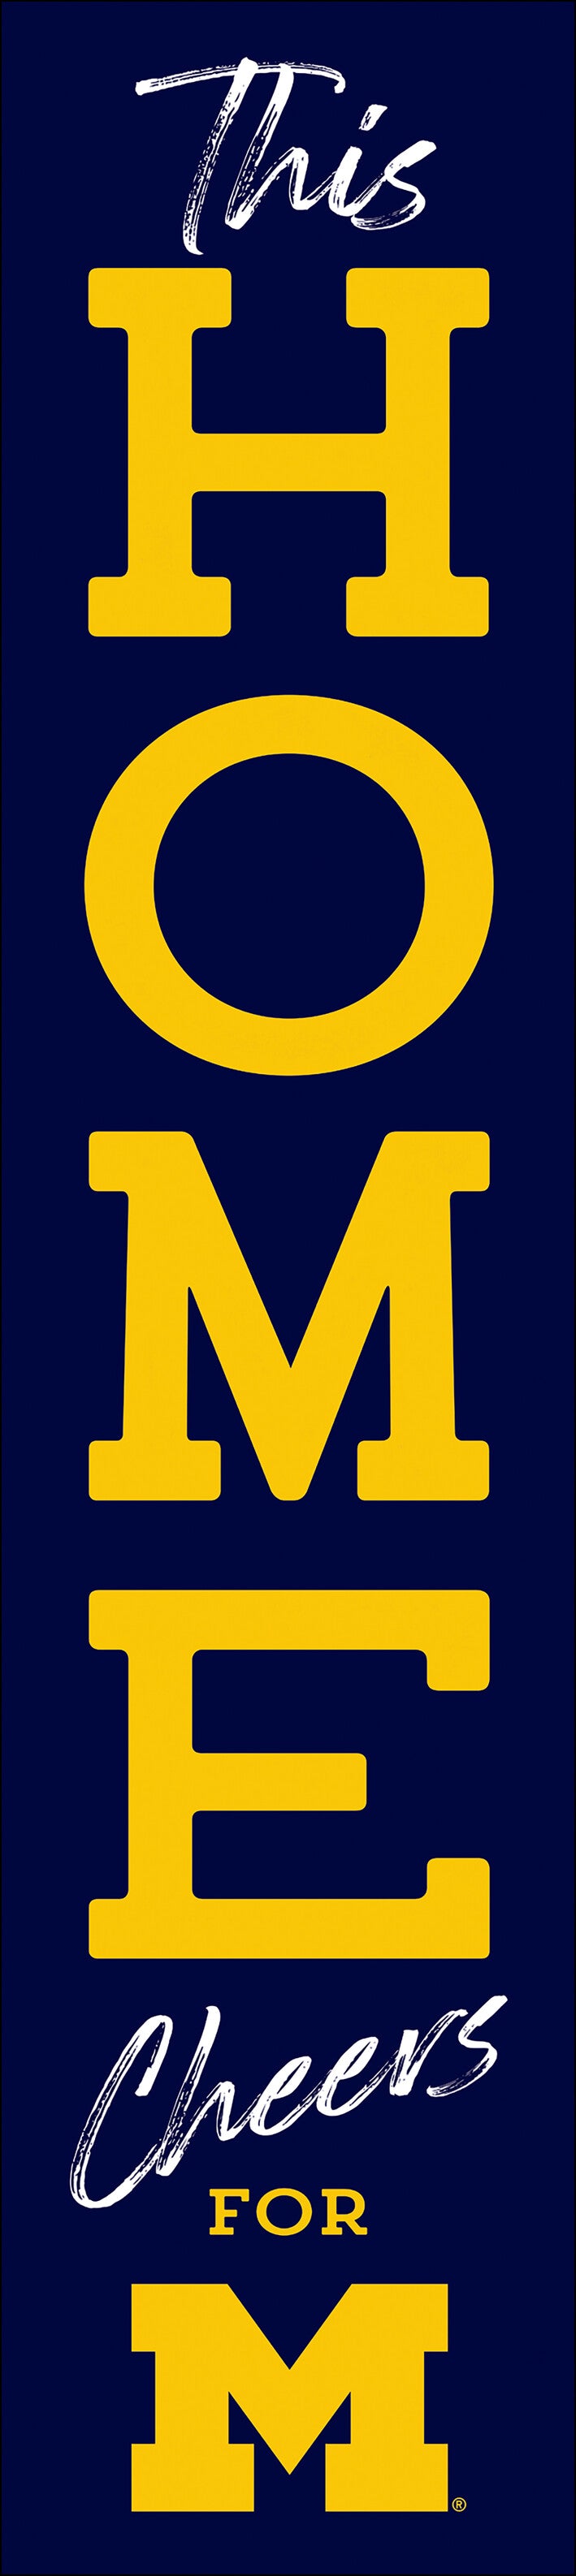 This Home Cheers for University of Michigan - Porch Sign